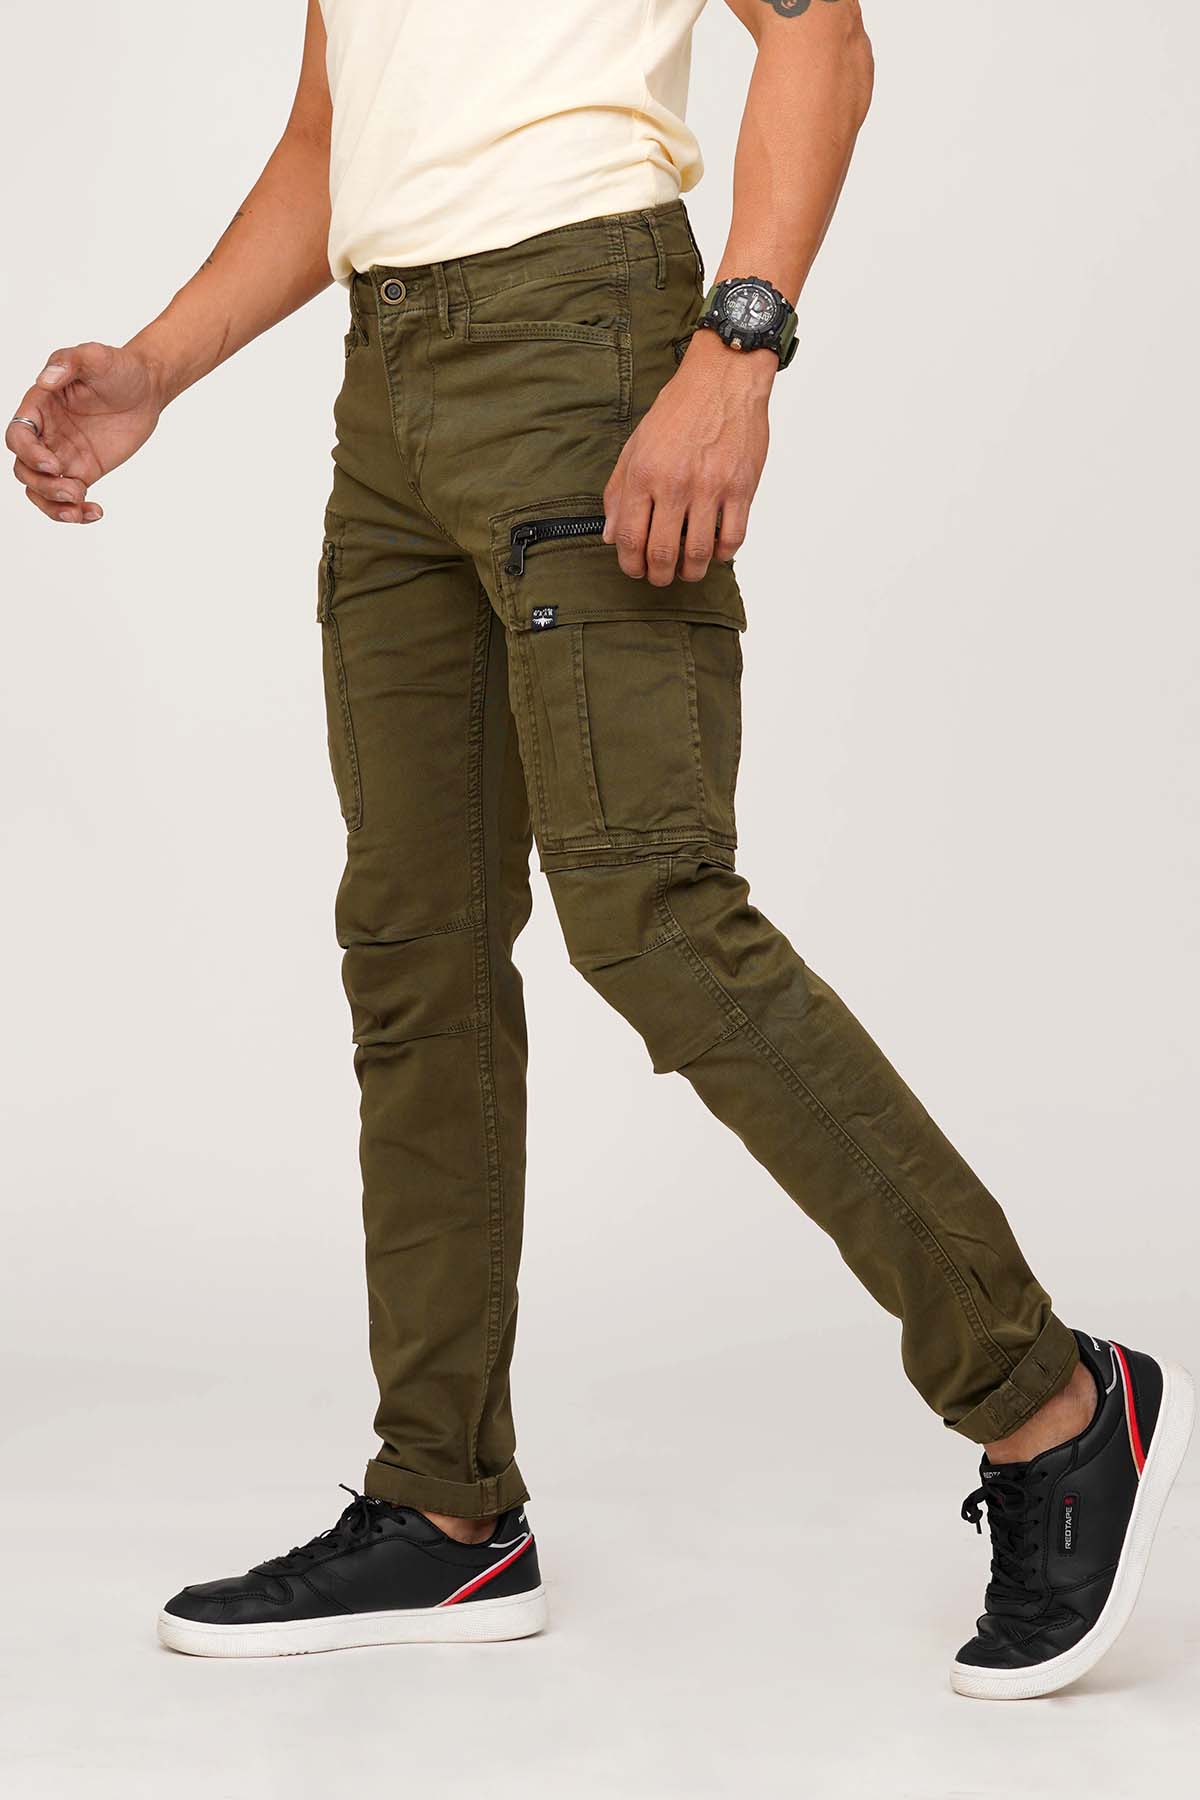 The Pant Project Green Camouflage Six Pocket Cotton Lycra Stylish Cargo Pant  for Men, Regular Slim Fit, Stretchable Cargos with 6 Pockets